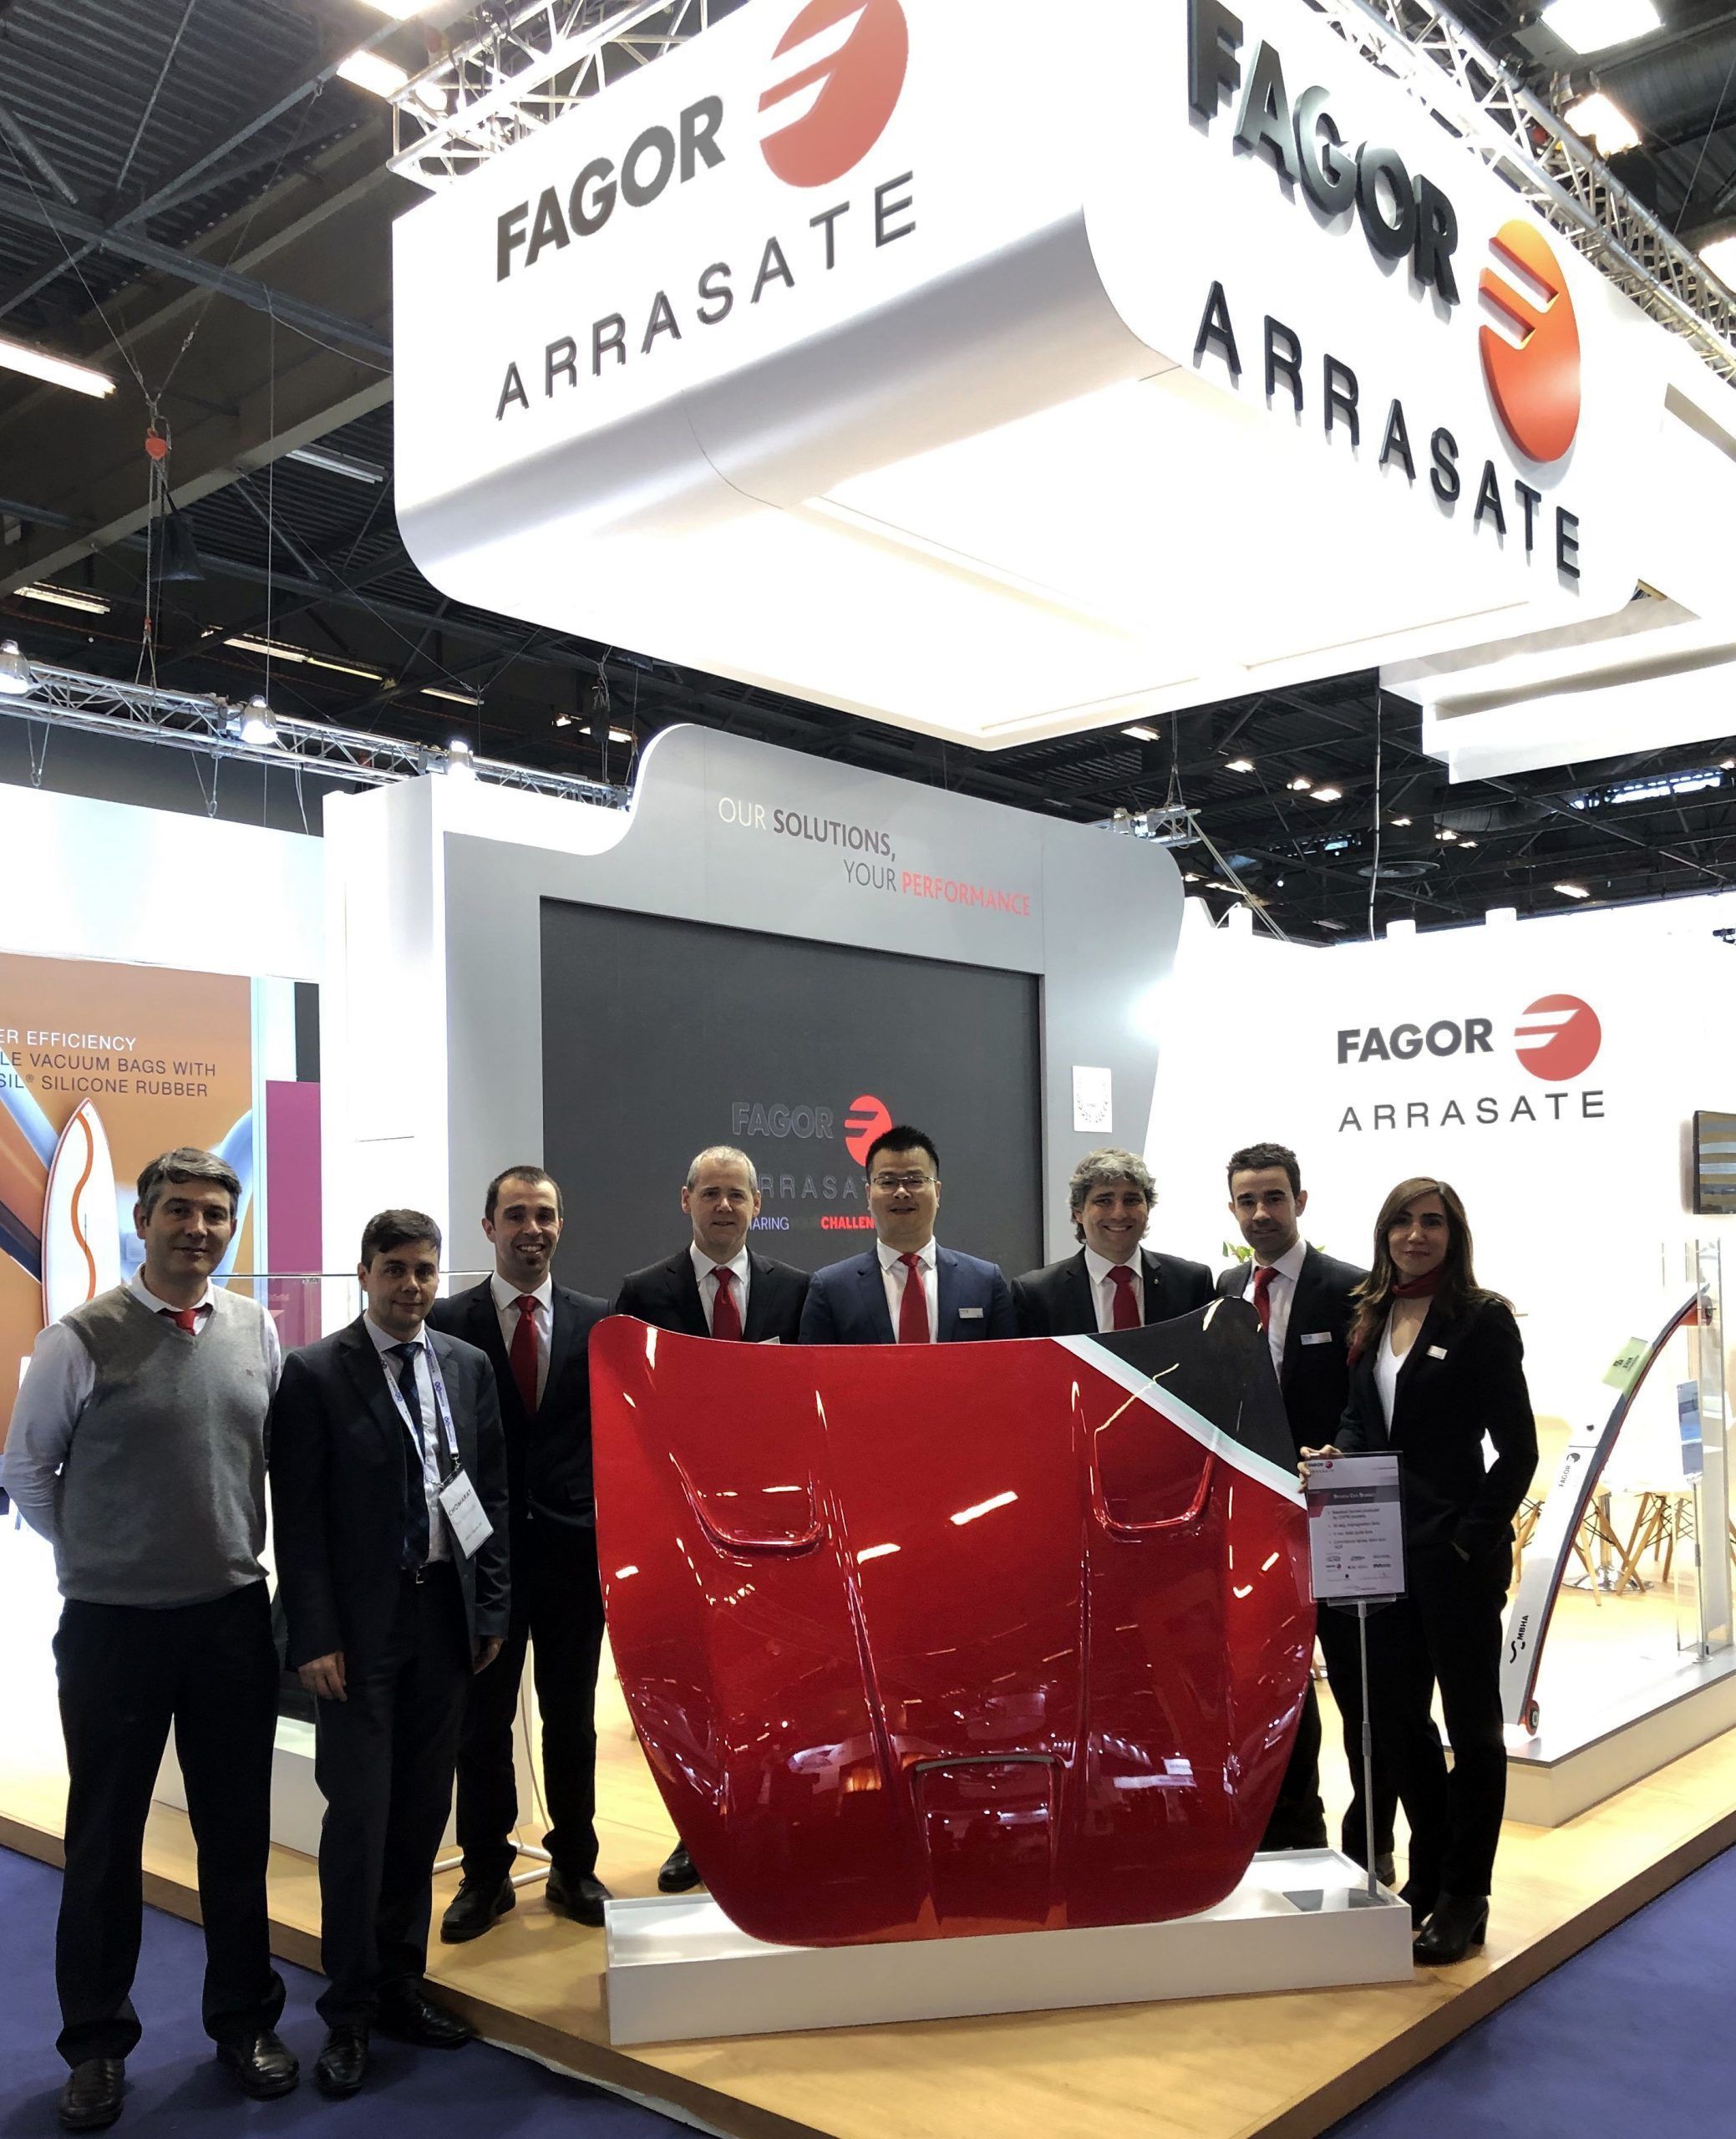 Fagor Arrasate event: FAGOR ARRASATE ACHIEVES COST SAVINGS OF UP TO 30% IN THE MANUFACTURE OF COMPOSITE HOODS USING CRTM